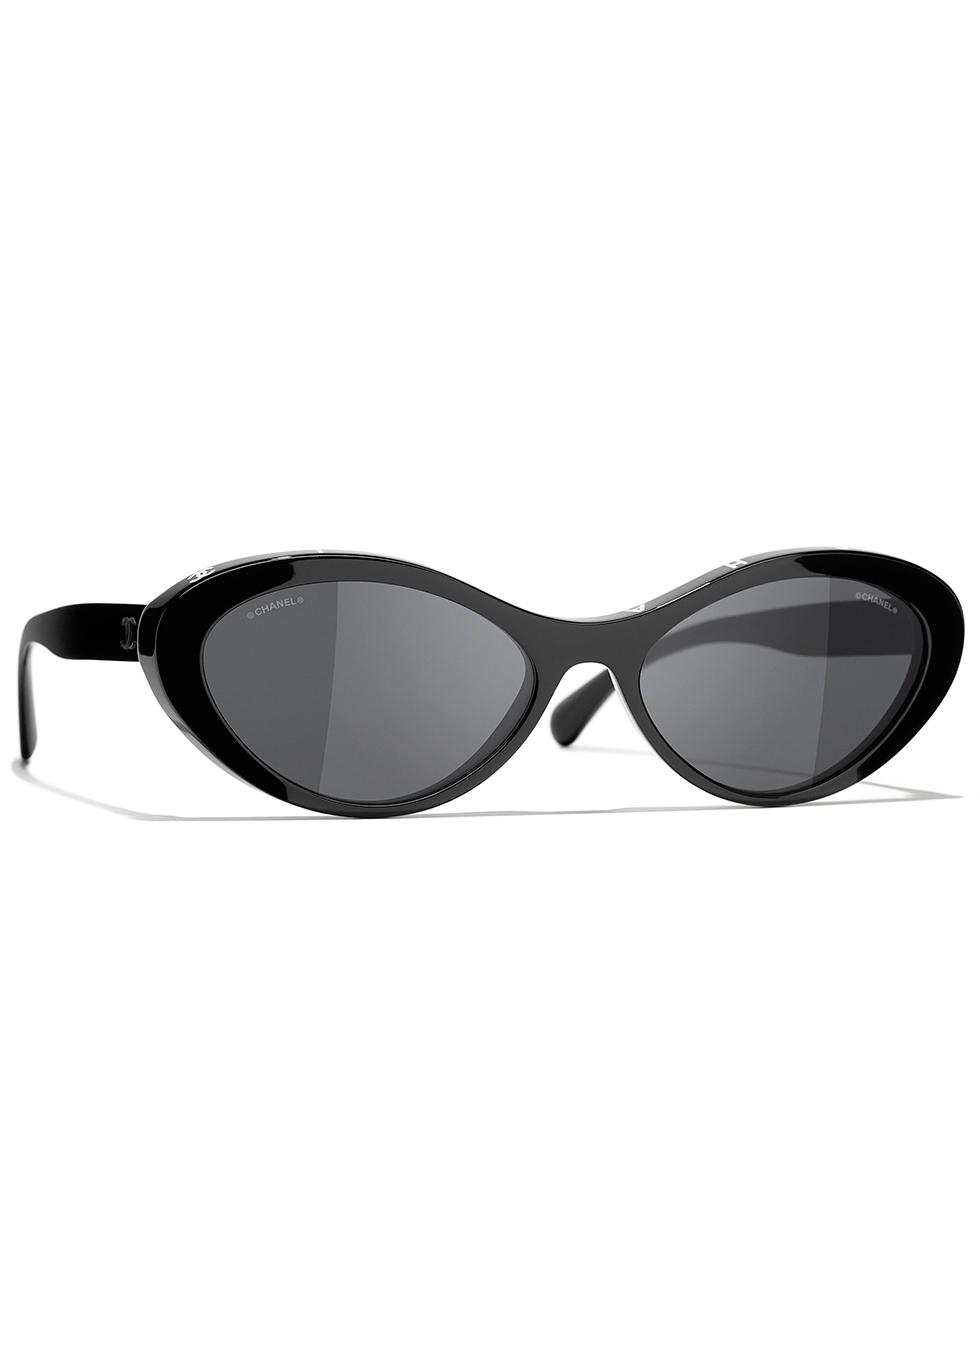 CHANEL Oval Sunglasses CH5414 Black/Grey at John Lewis & Partners